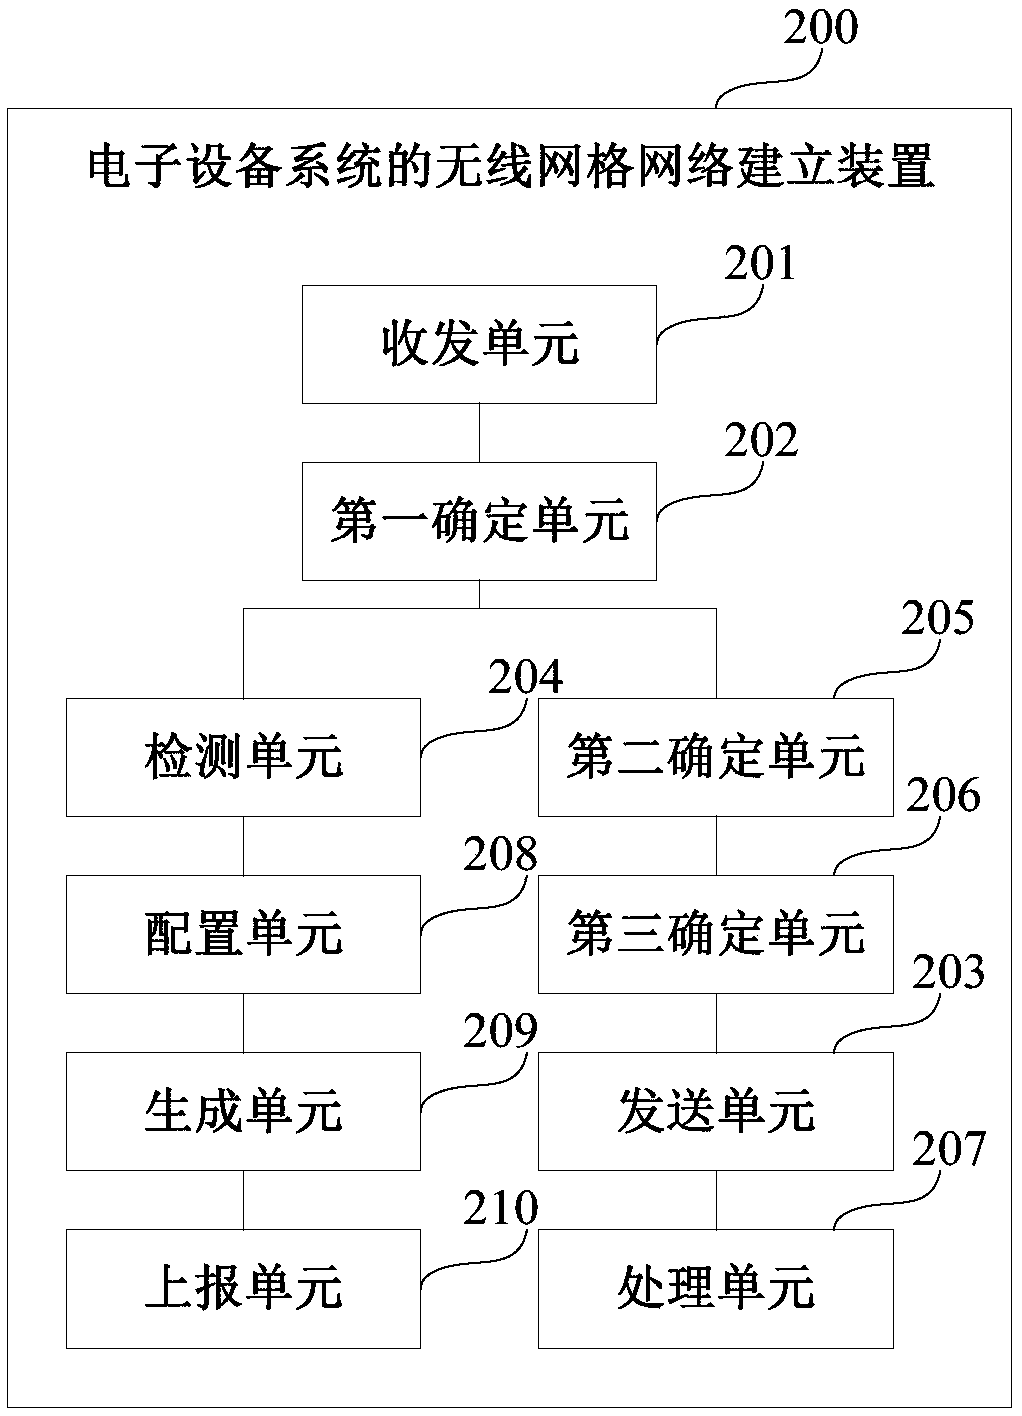 Wireless mesh network establishment method, apparatus and system of electronic device system